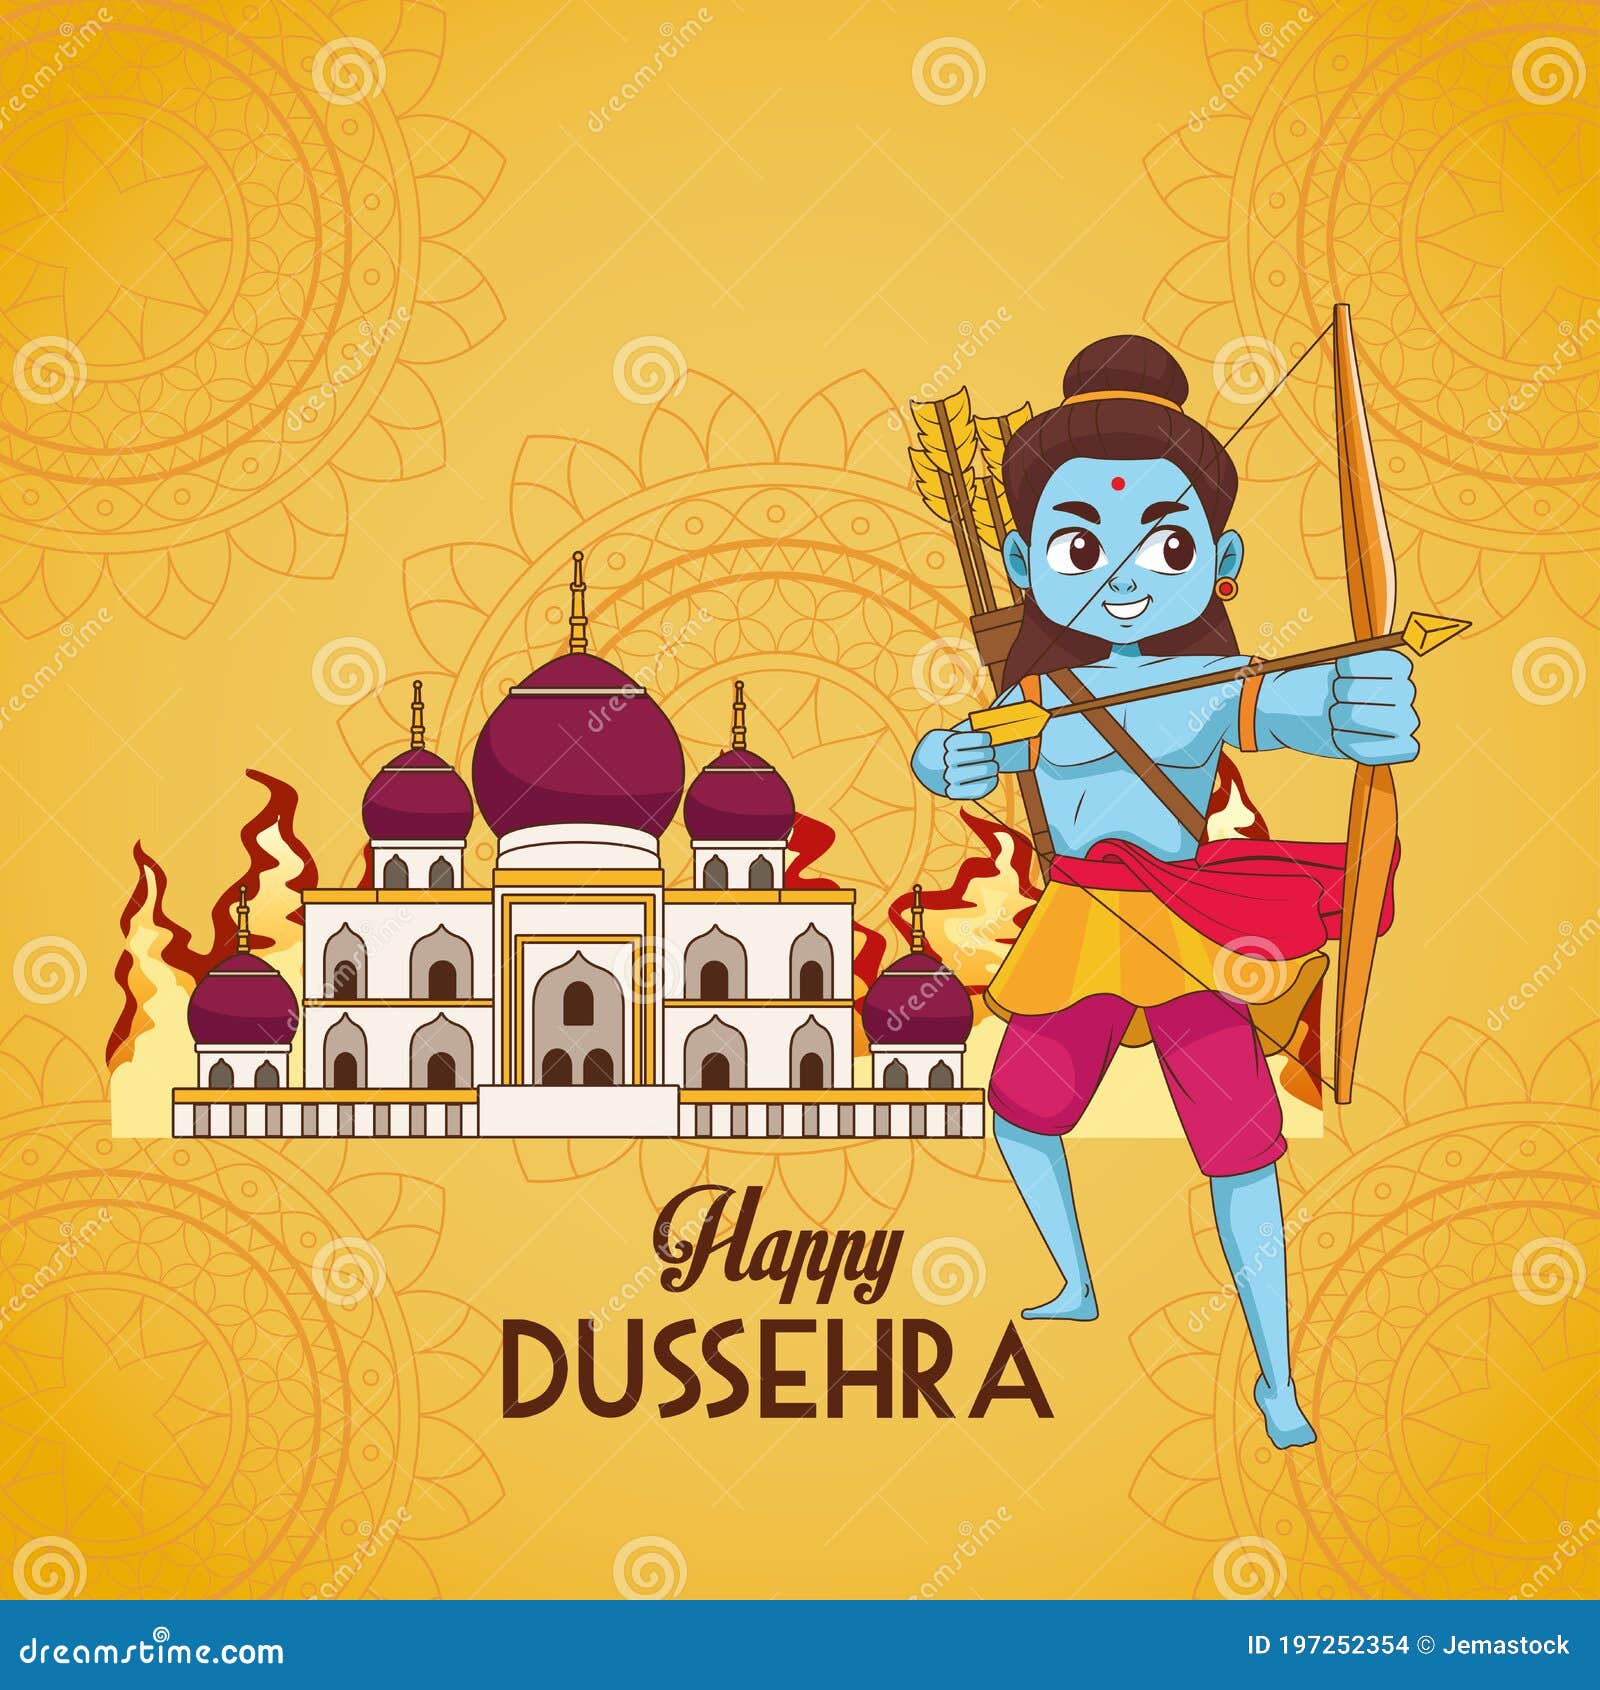 Happy Dussehra Festival Poster with Blue Rama Character and Mosque Building  Stock Vector - Illustration of editable, arrow: 197252354